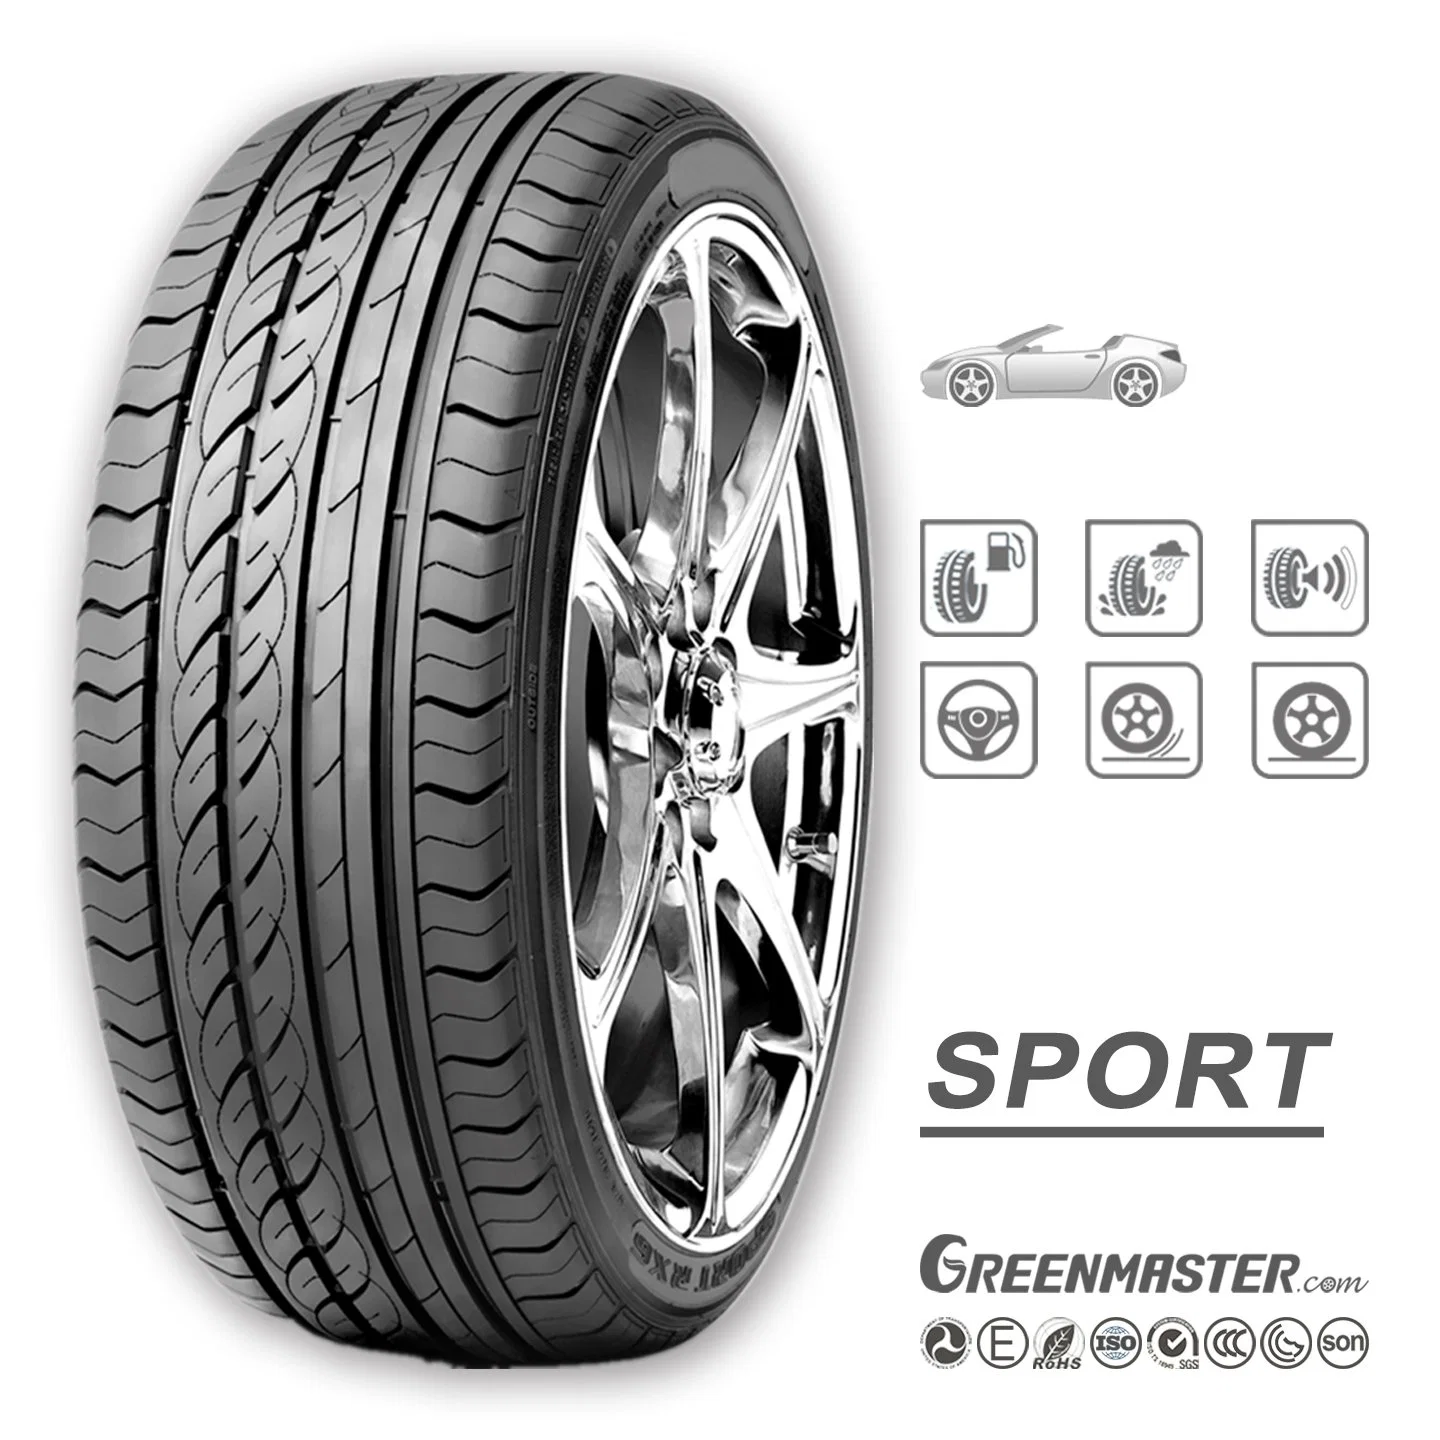 Used Car Tire 175/70r13 155r12c 175/70r14 165/70r12 175/80r13 Car Tyre Chinese Tyre Prices